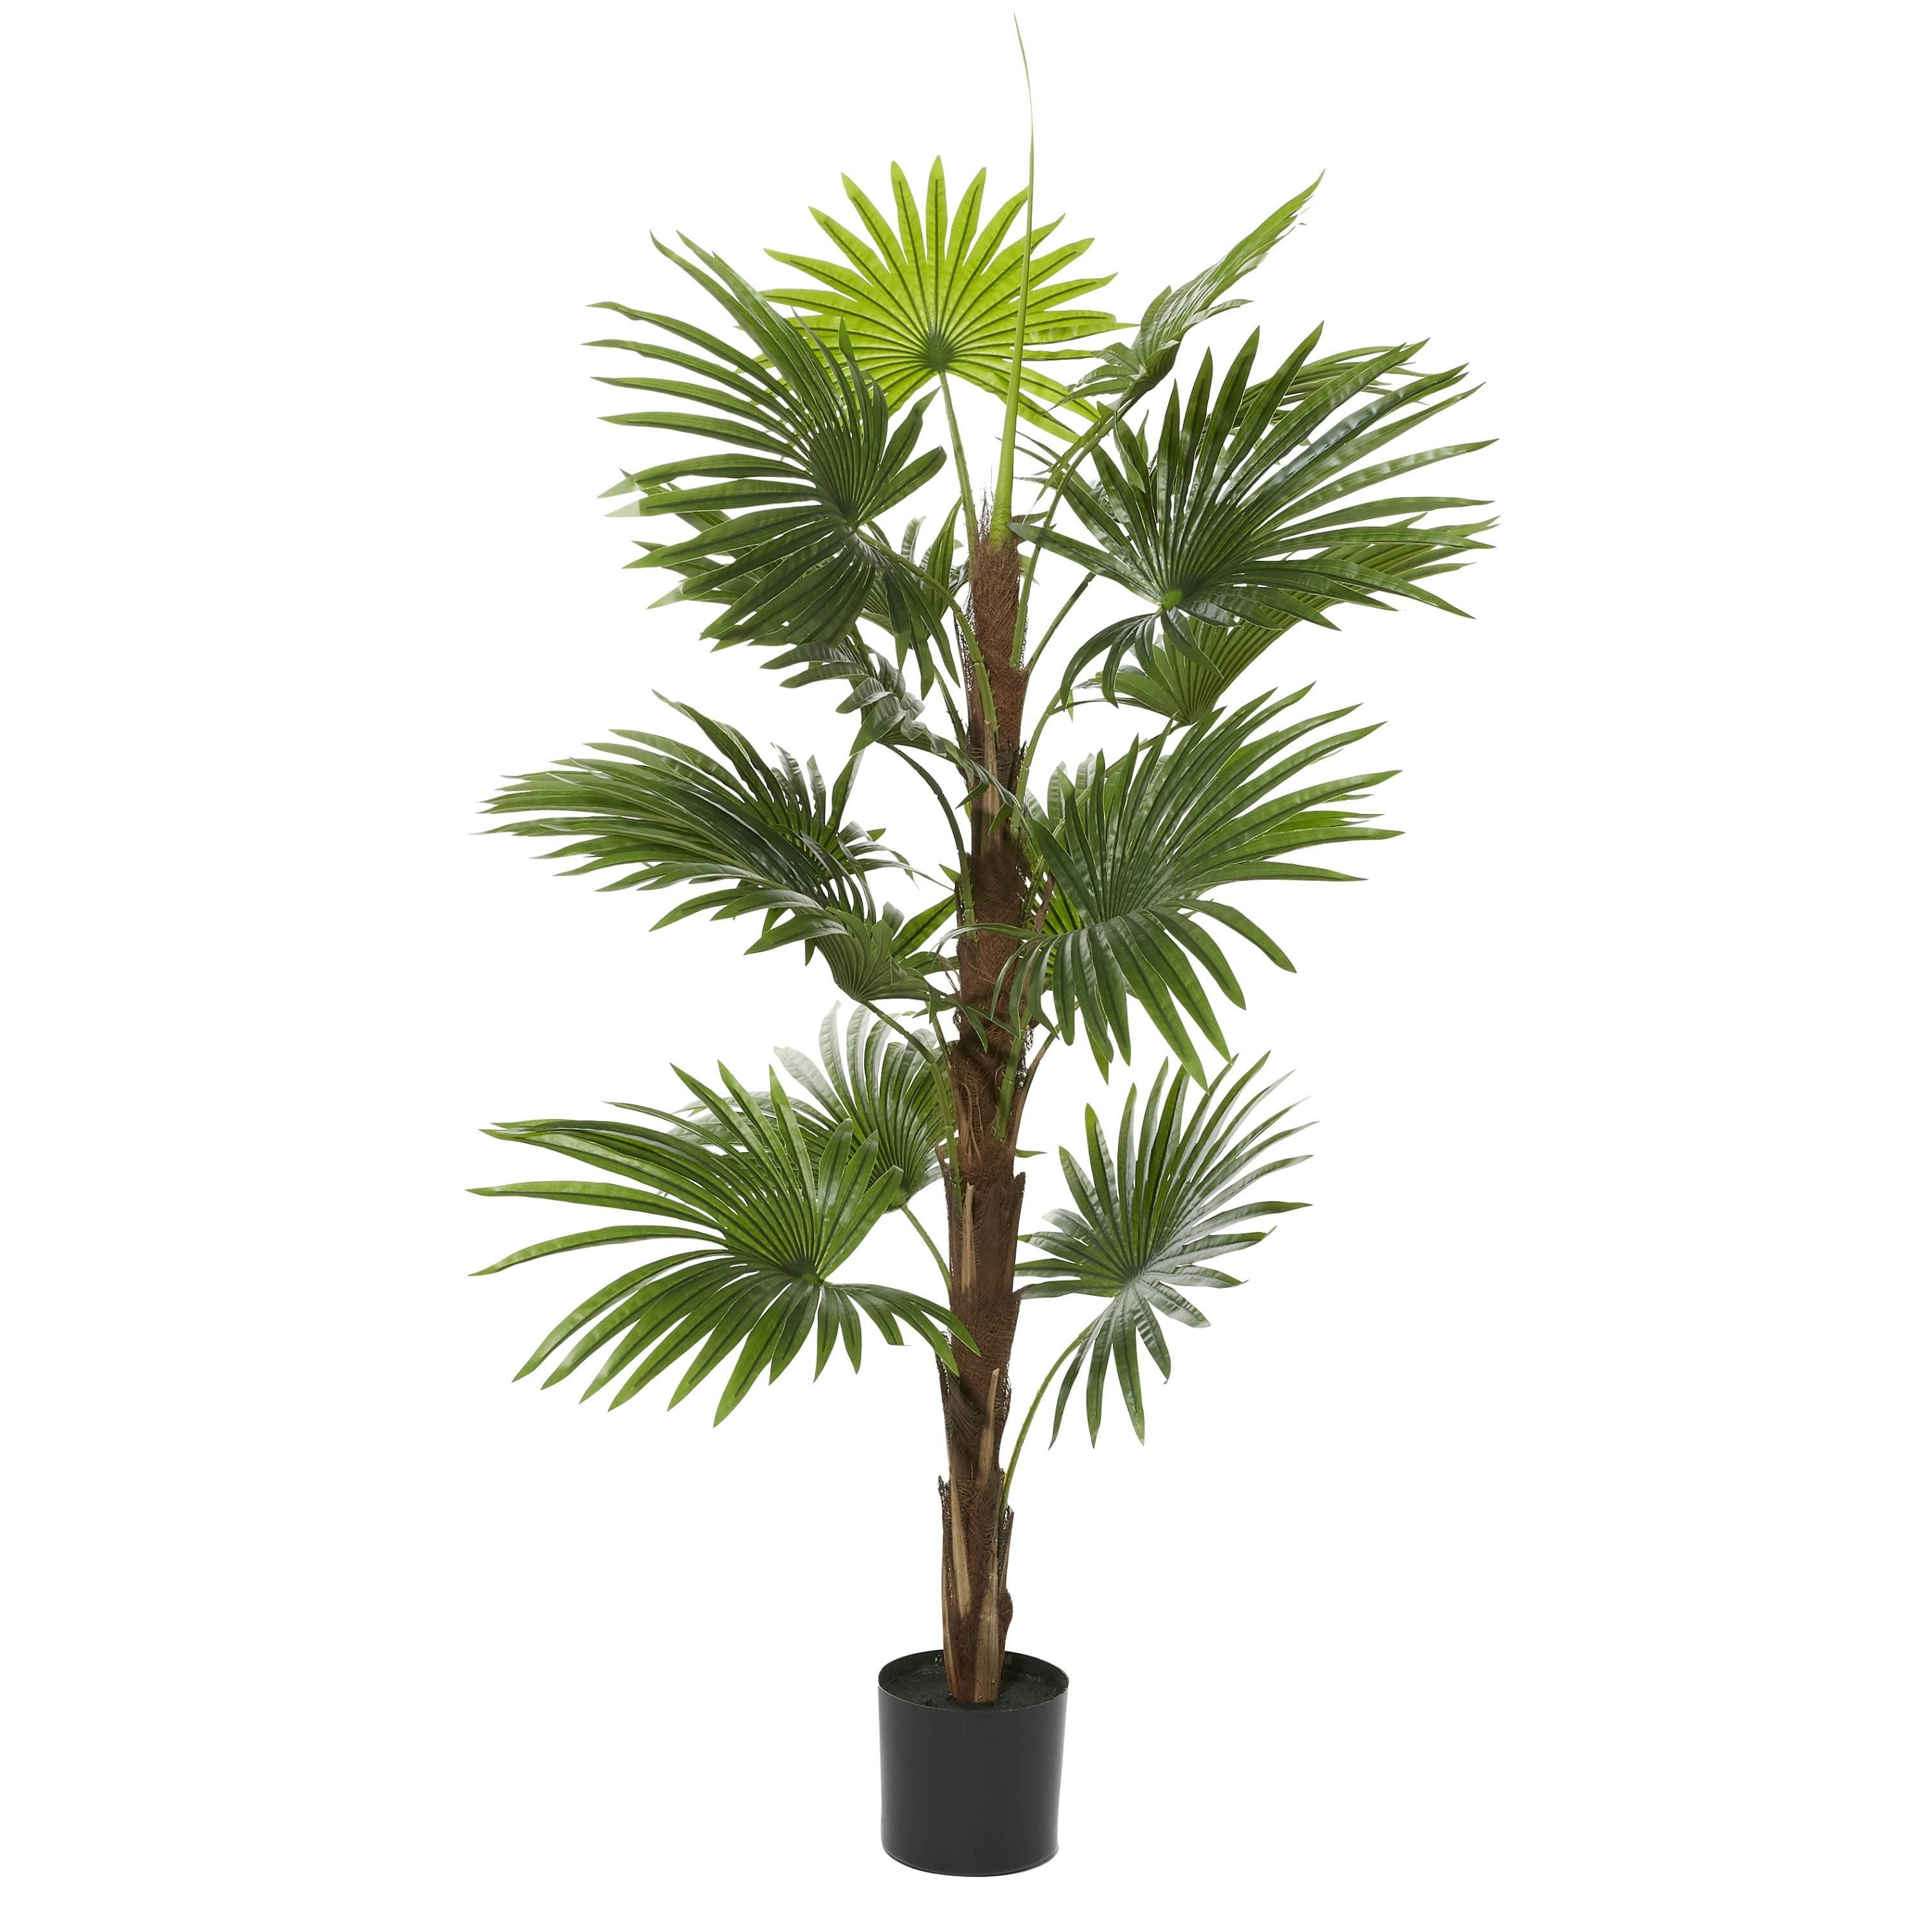 Lush Green 65" Artificial Fountain Palm Tree with Black Plastic Pot